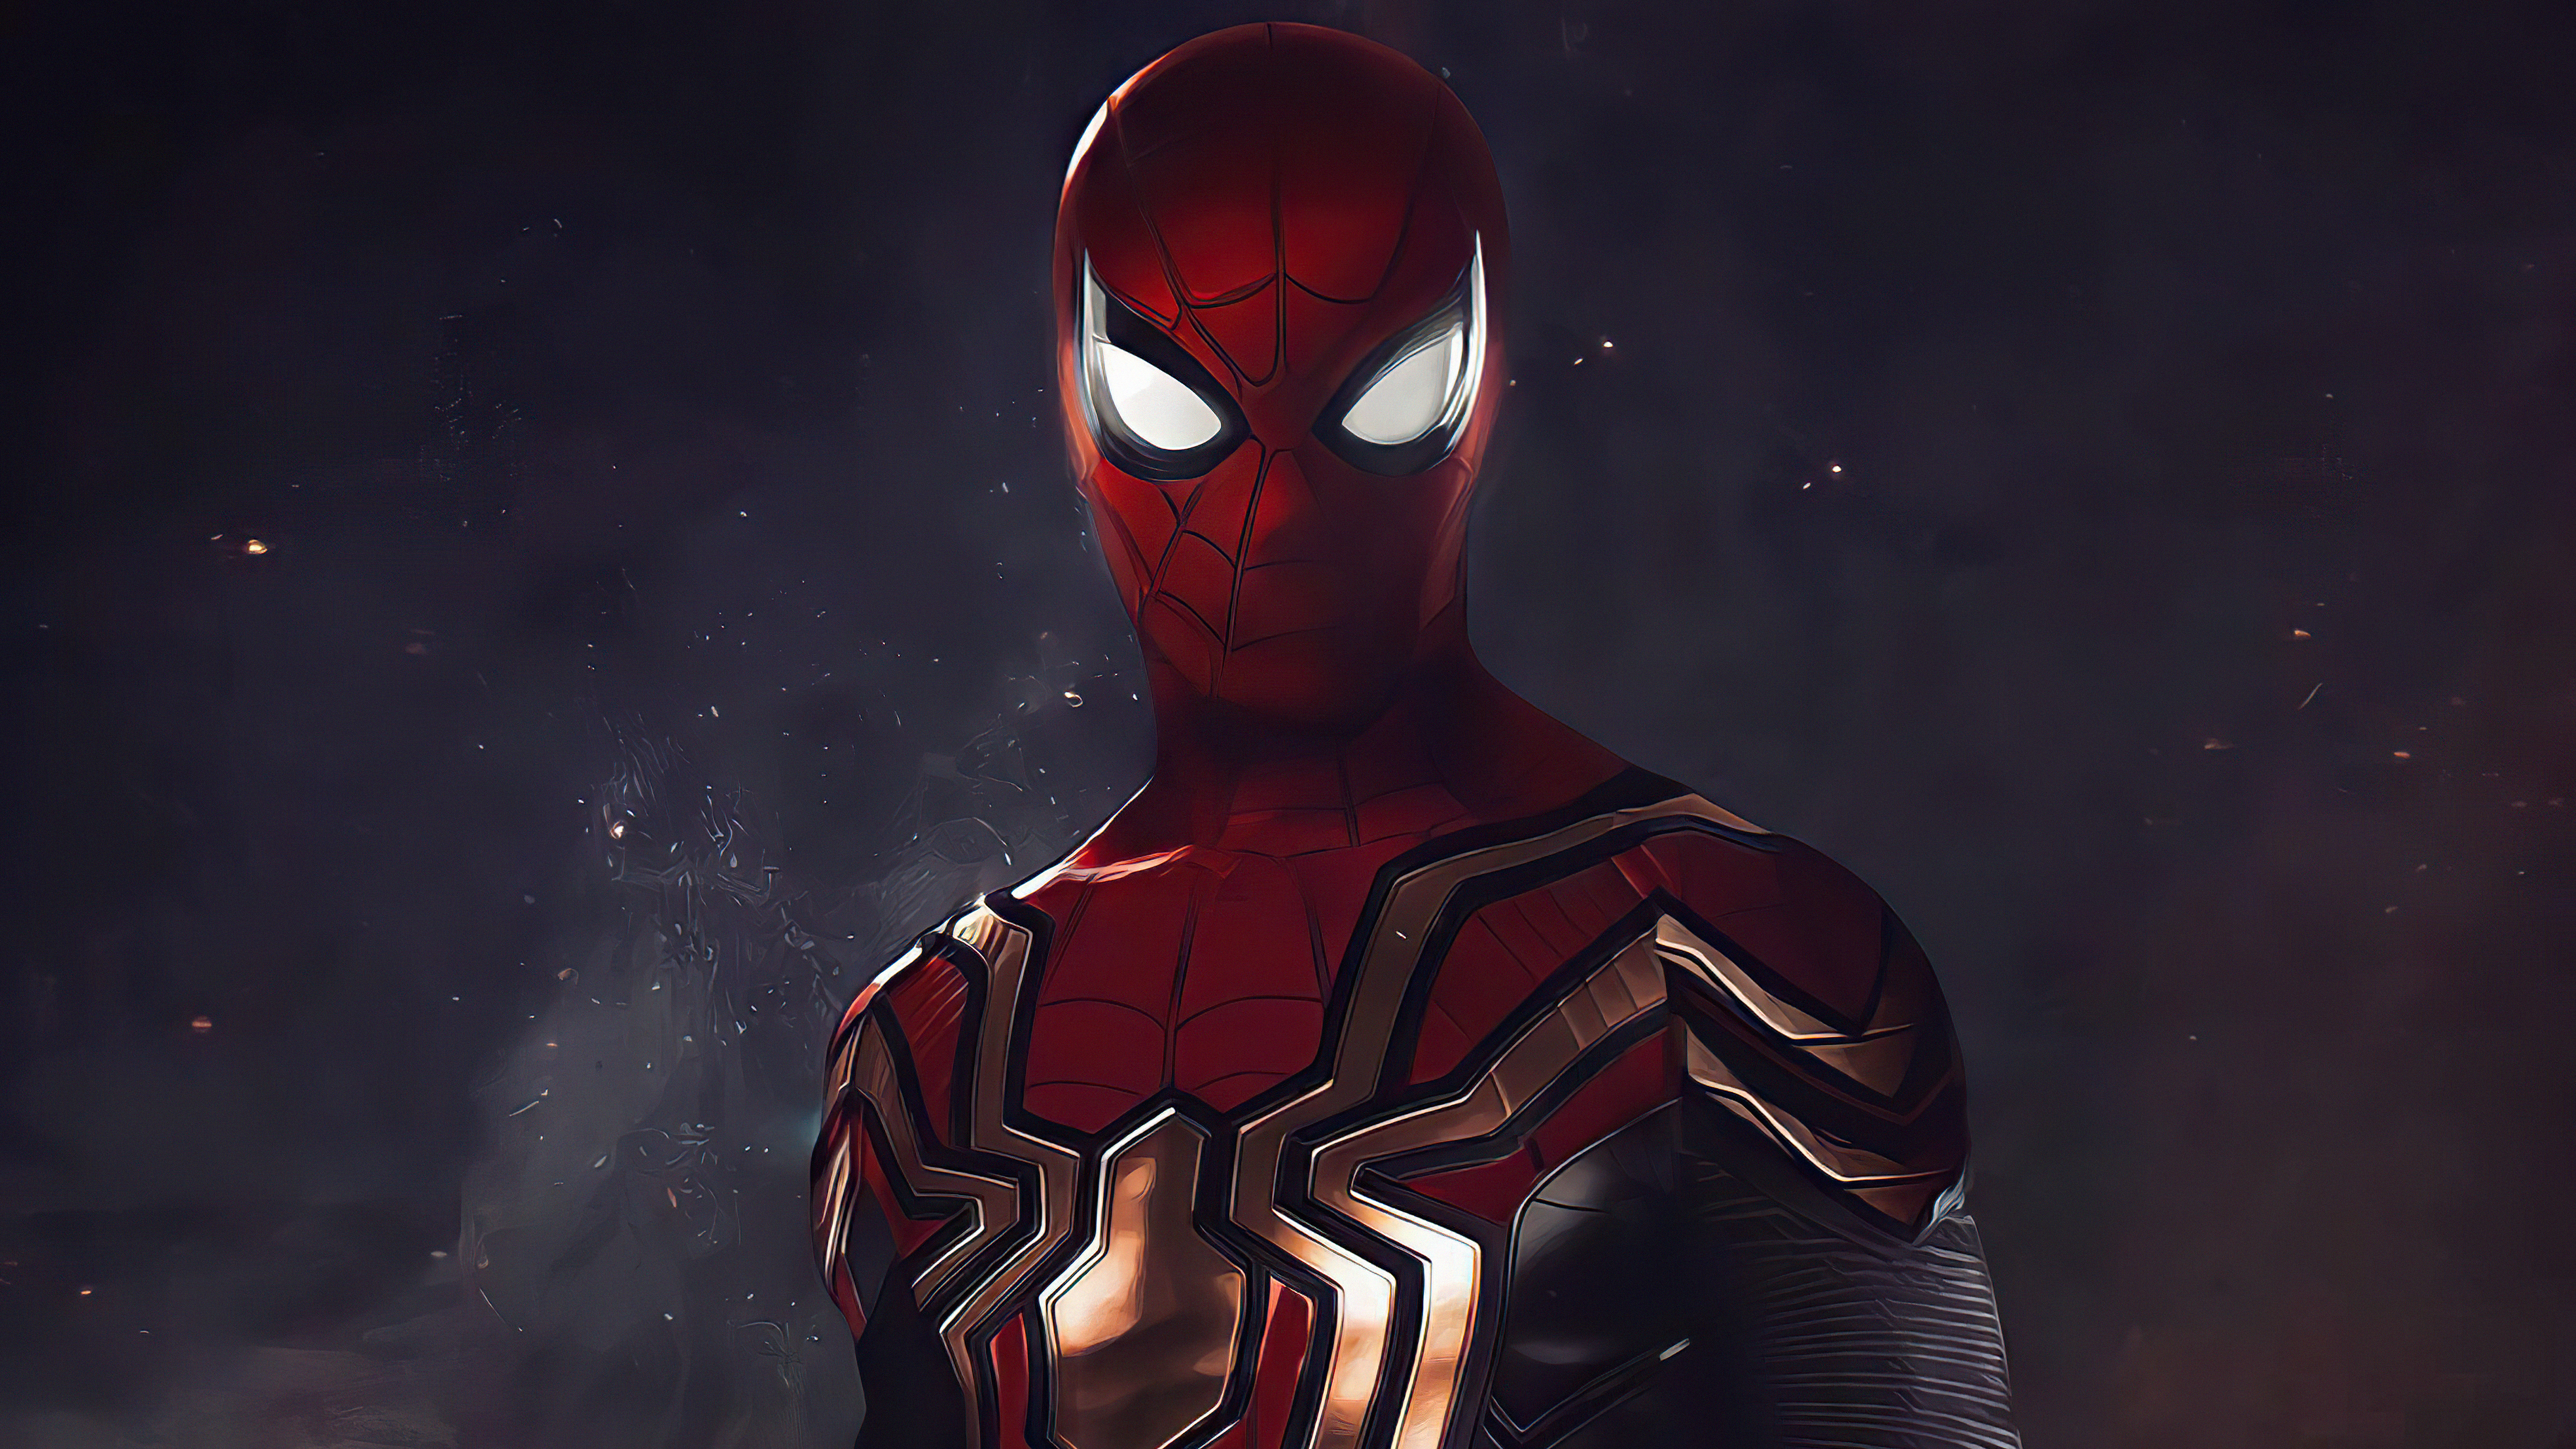 Spider Man No way home integrated suit Wallpaper 5k Ultra HD ID:8767